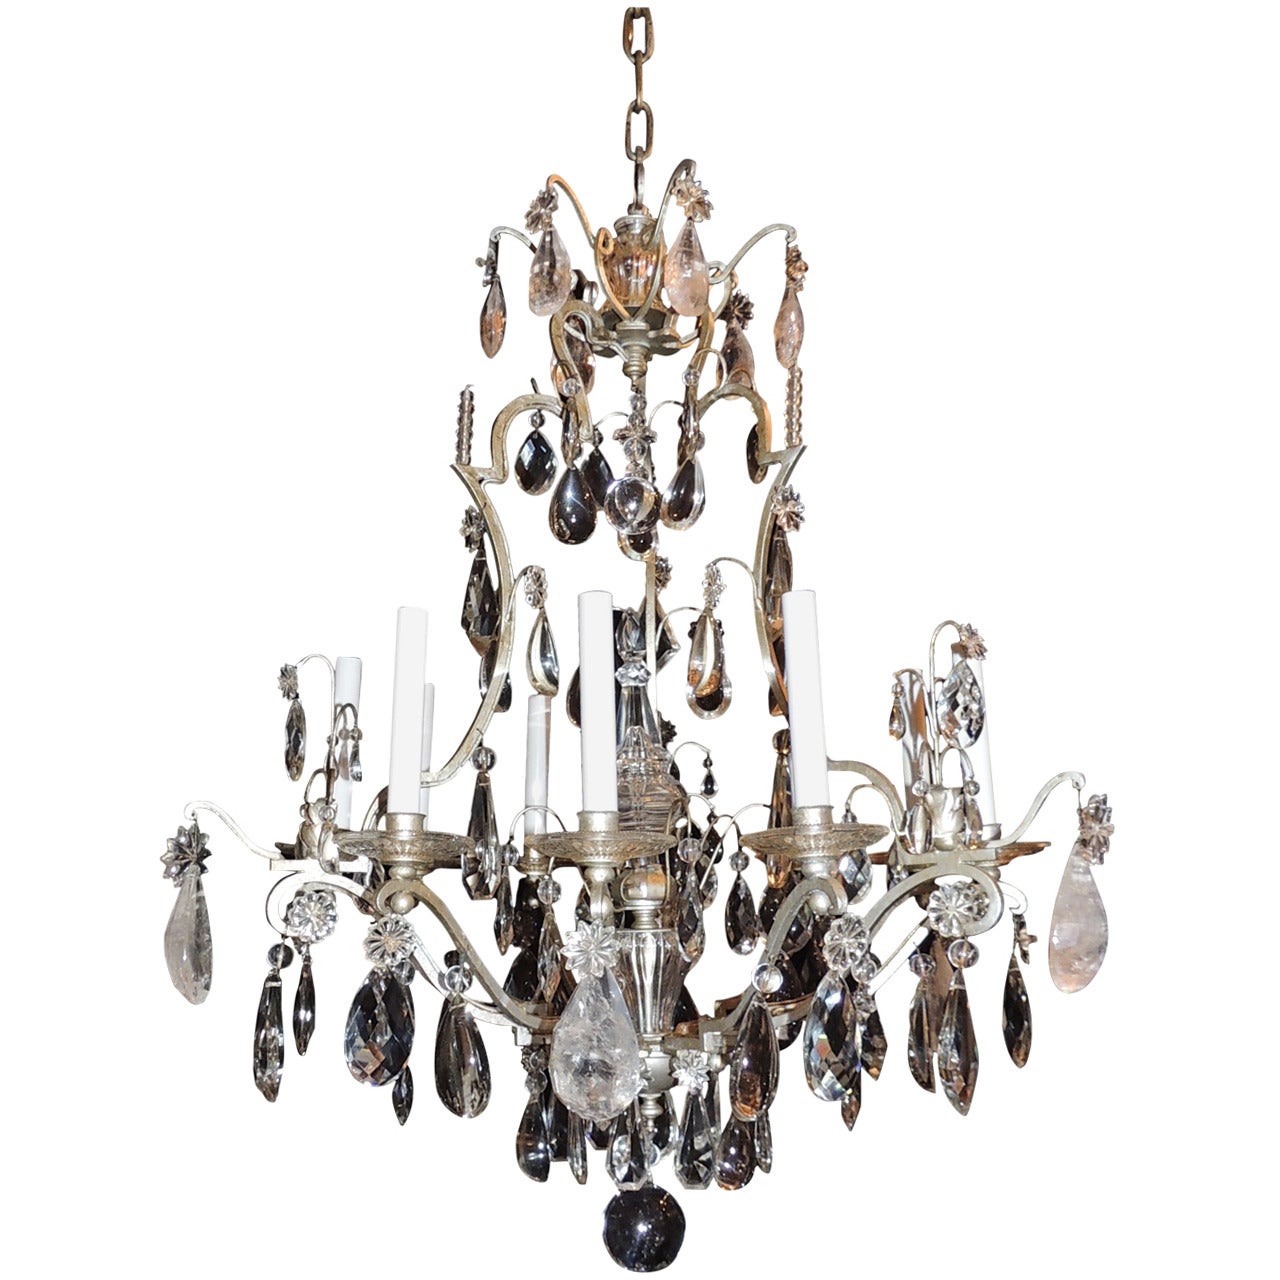 Original Bagues Nine-Light Silvered Chandelier with Rock and Faceted Crystals For Sale